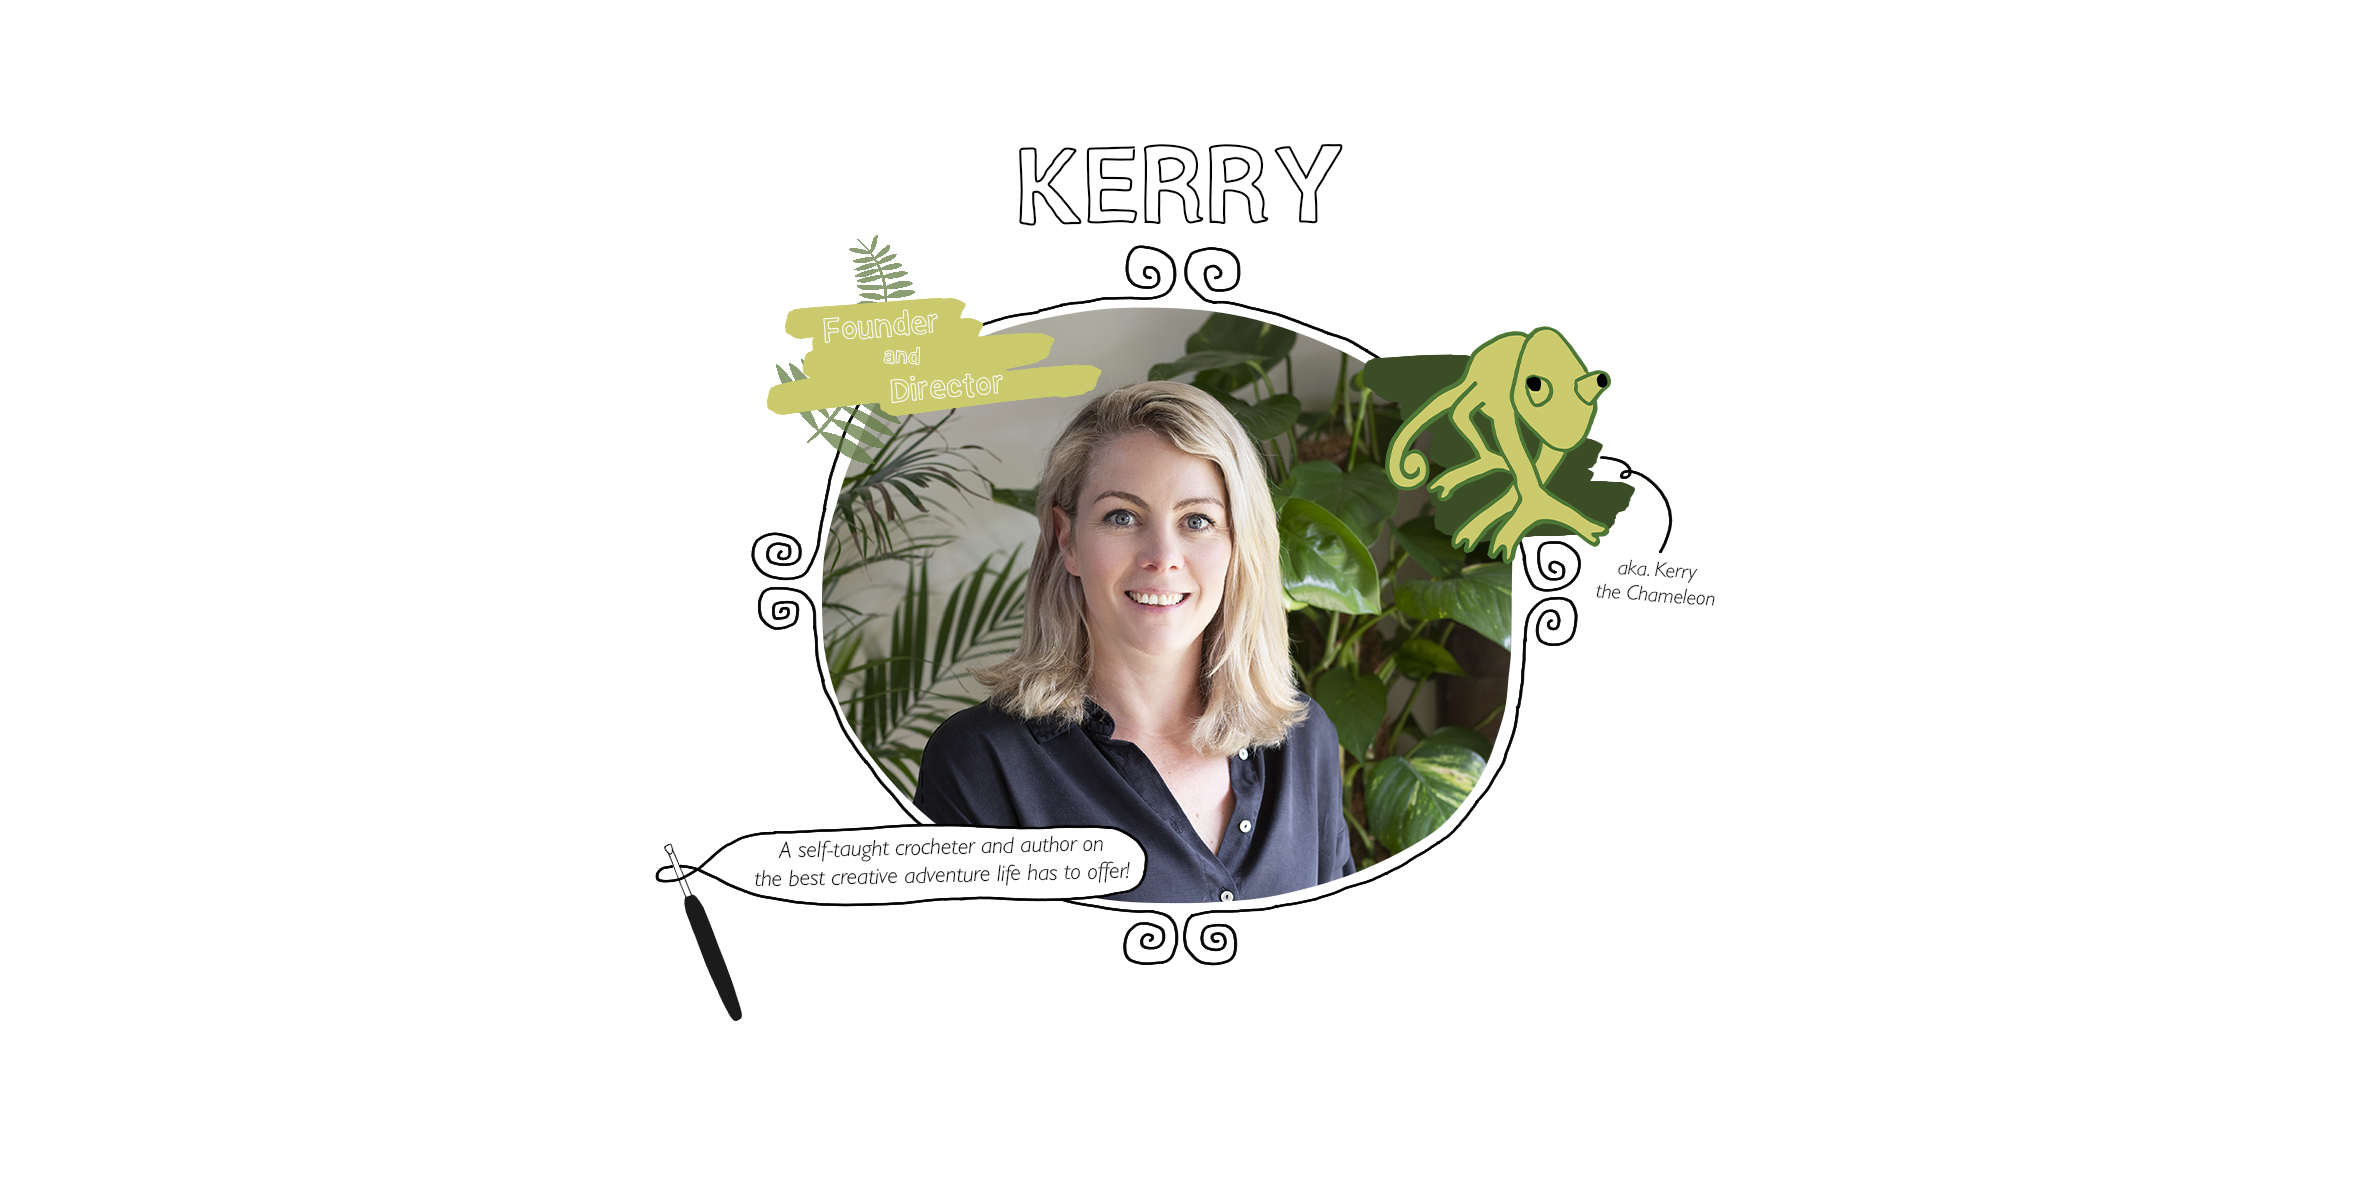 Kerry: Founder and Director